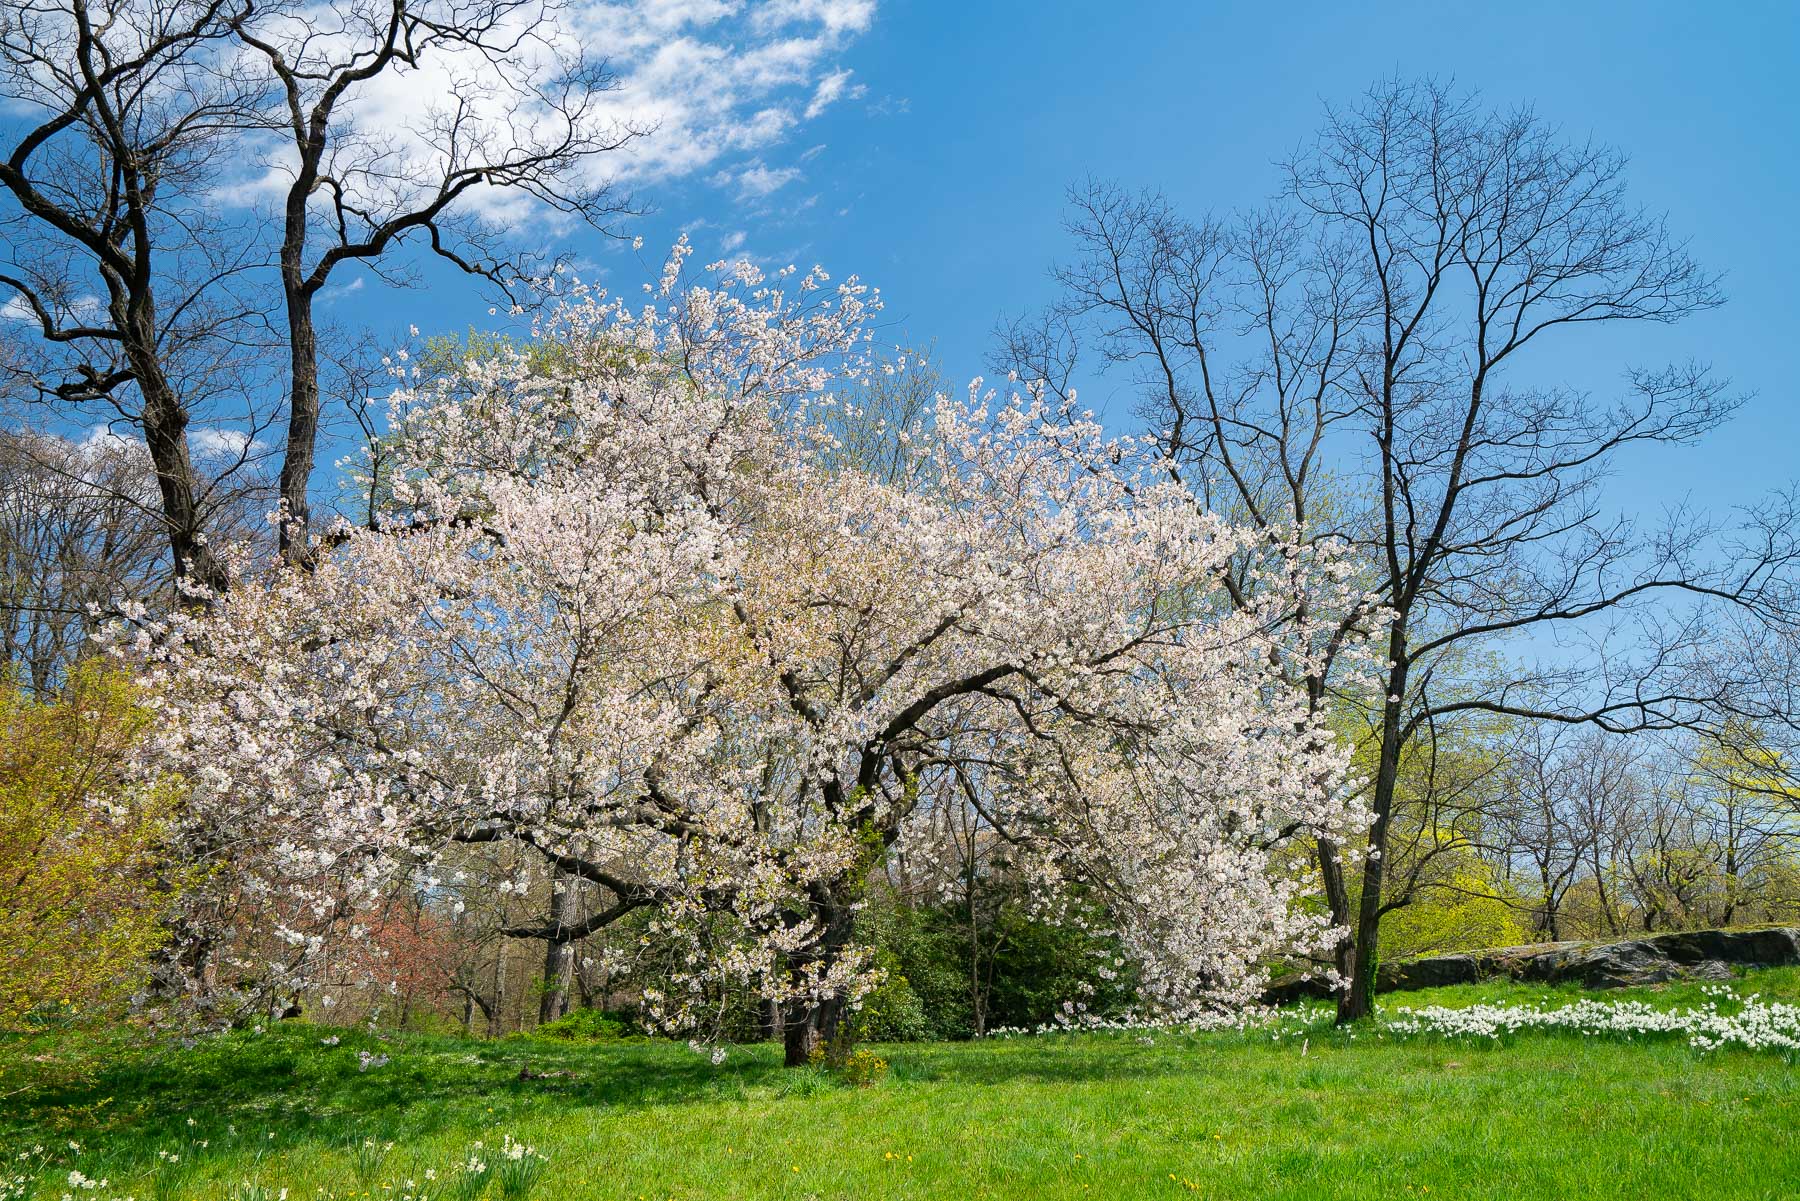 A Cherry Blossoms tree blooming in a green field with pops of flowers blooming  at the New York Botanical Garden